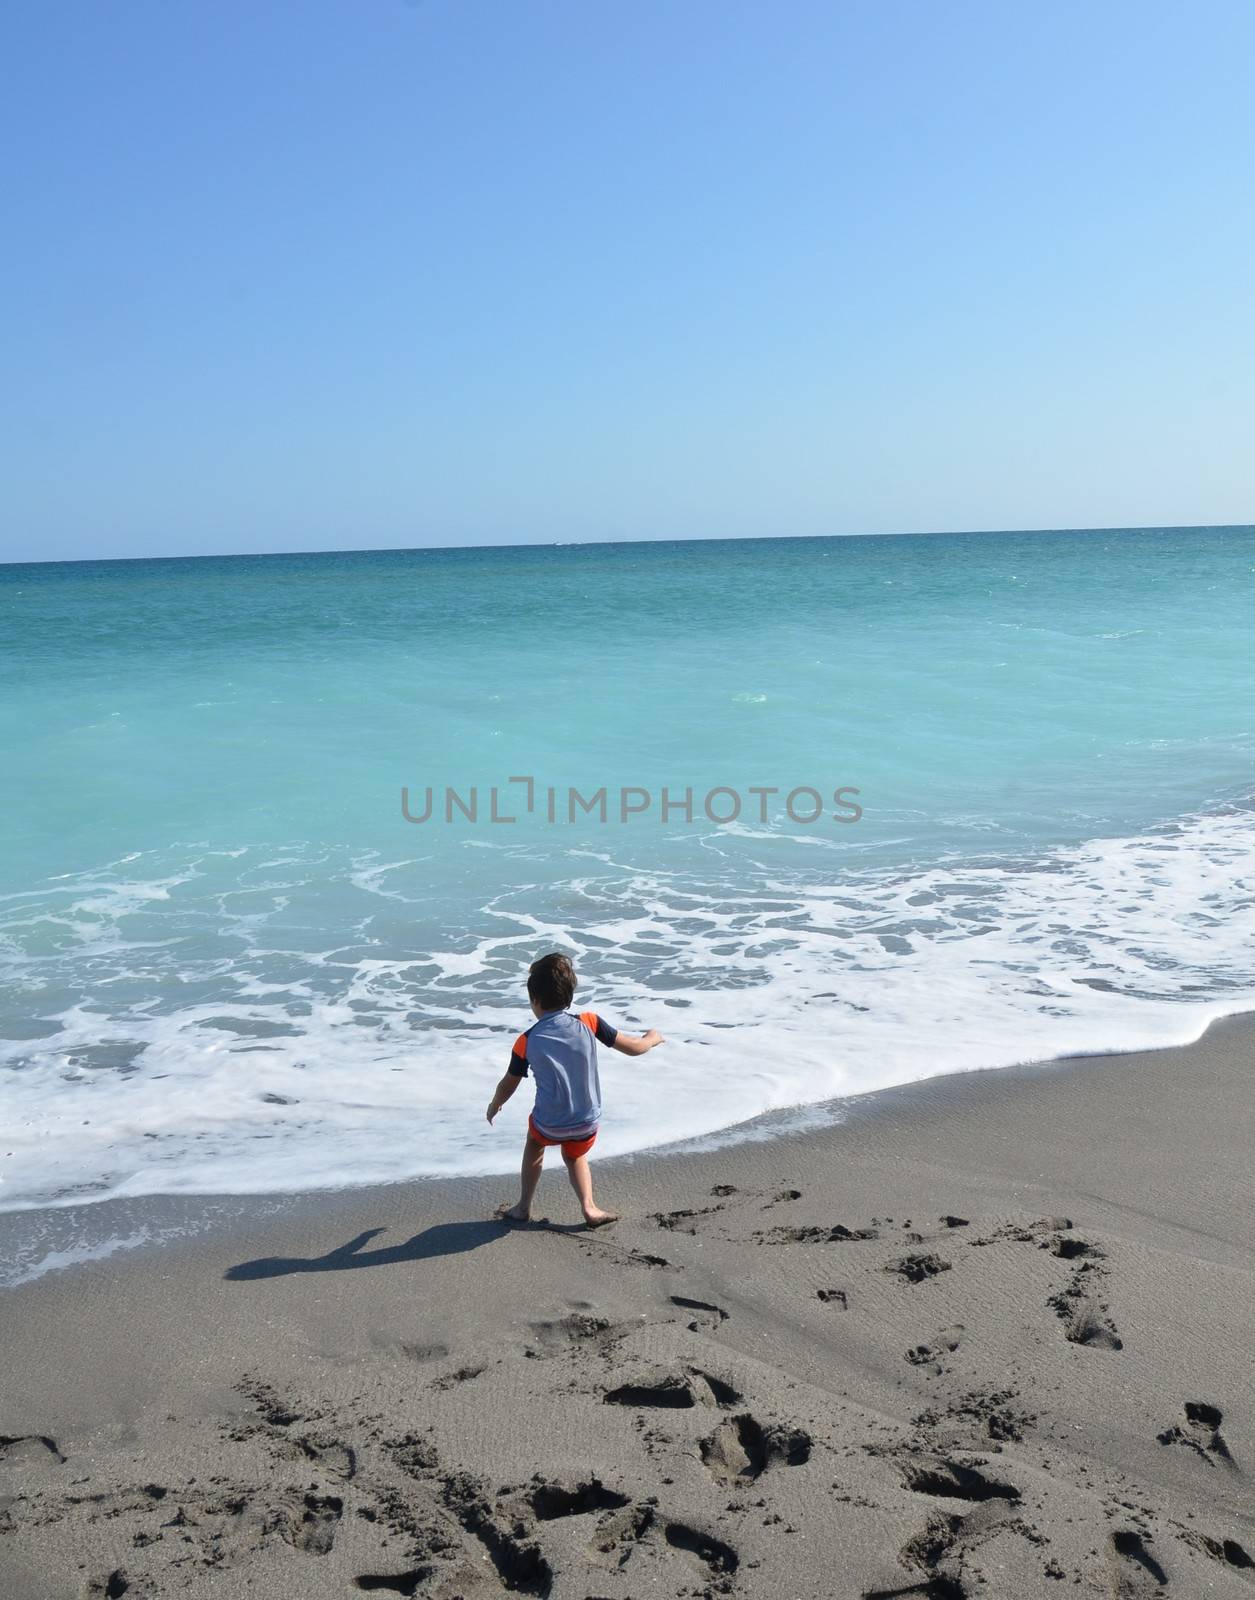 small boy child on the beach with footprints and ocean by stockphotofan1